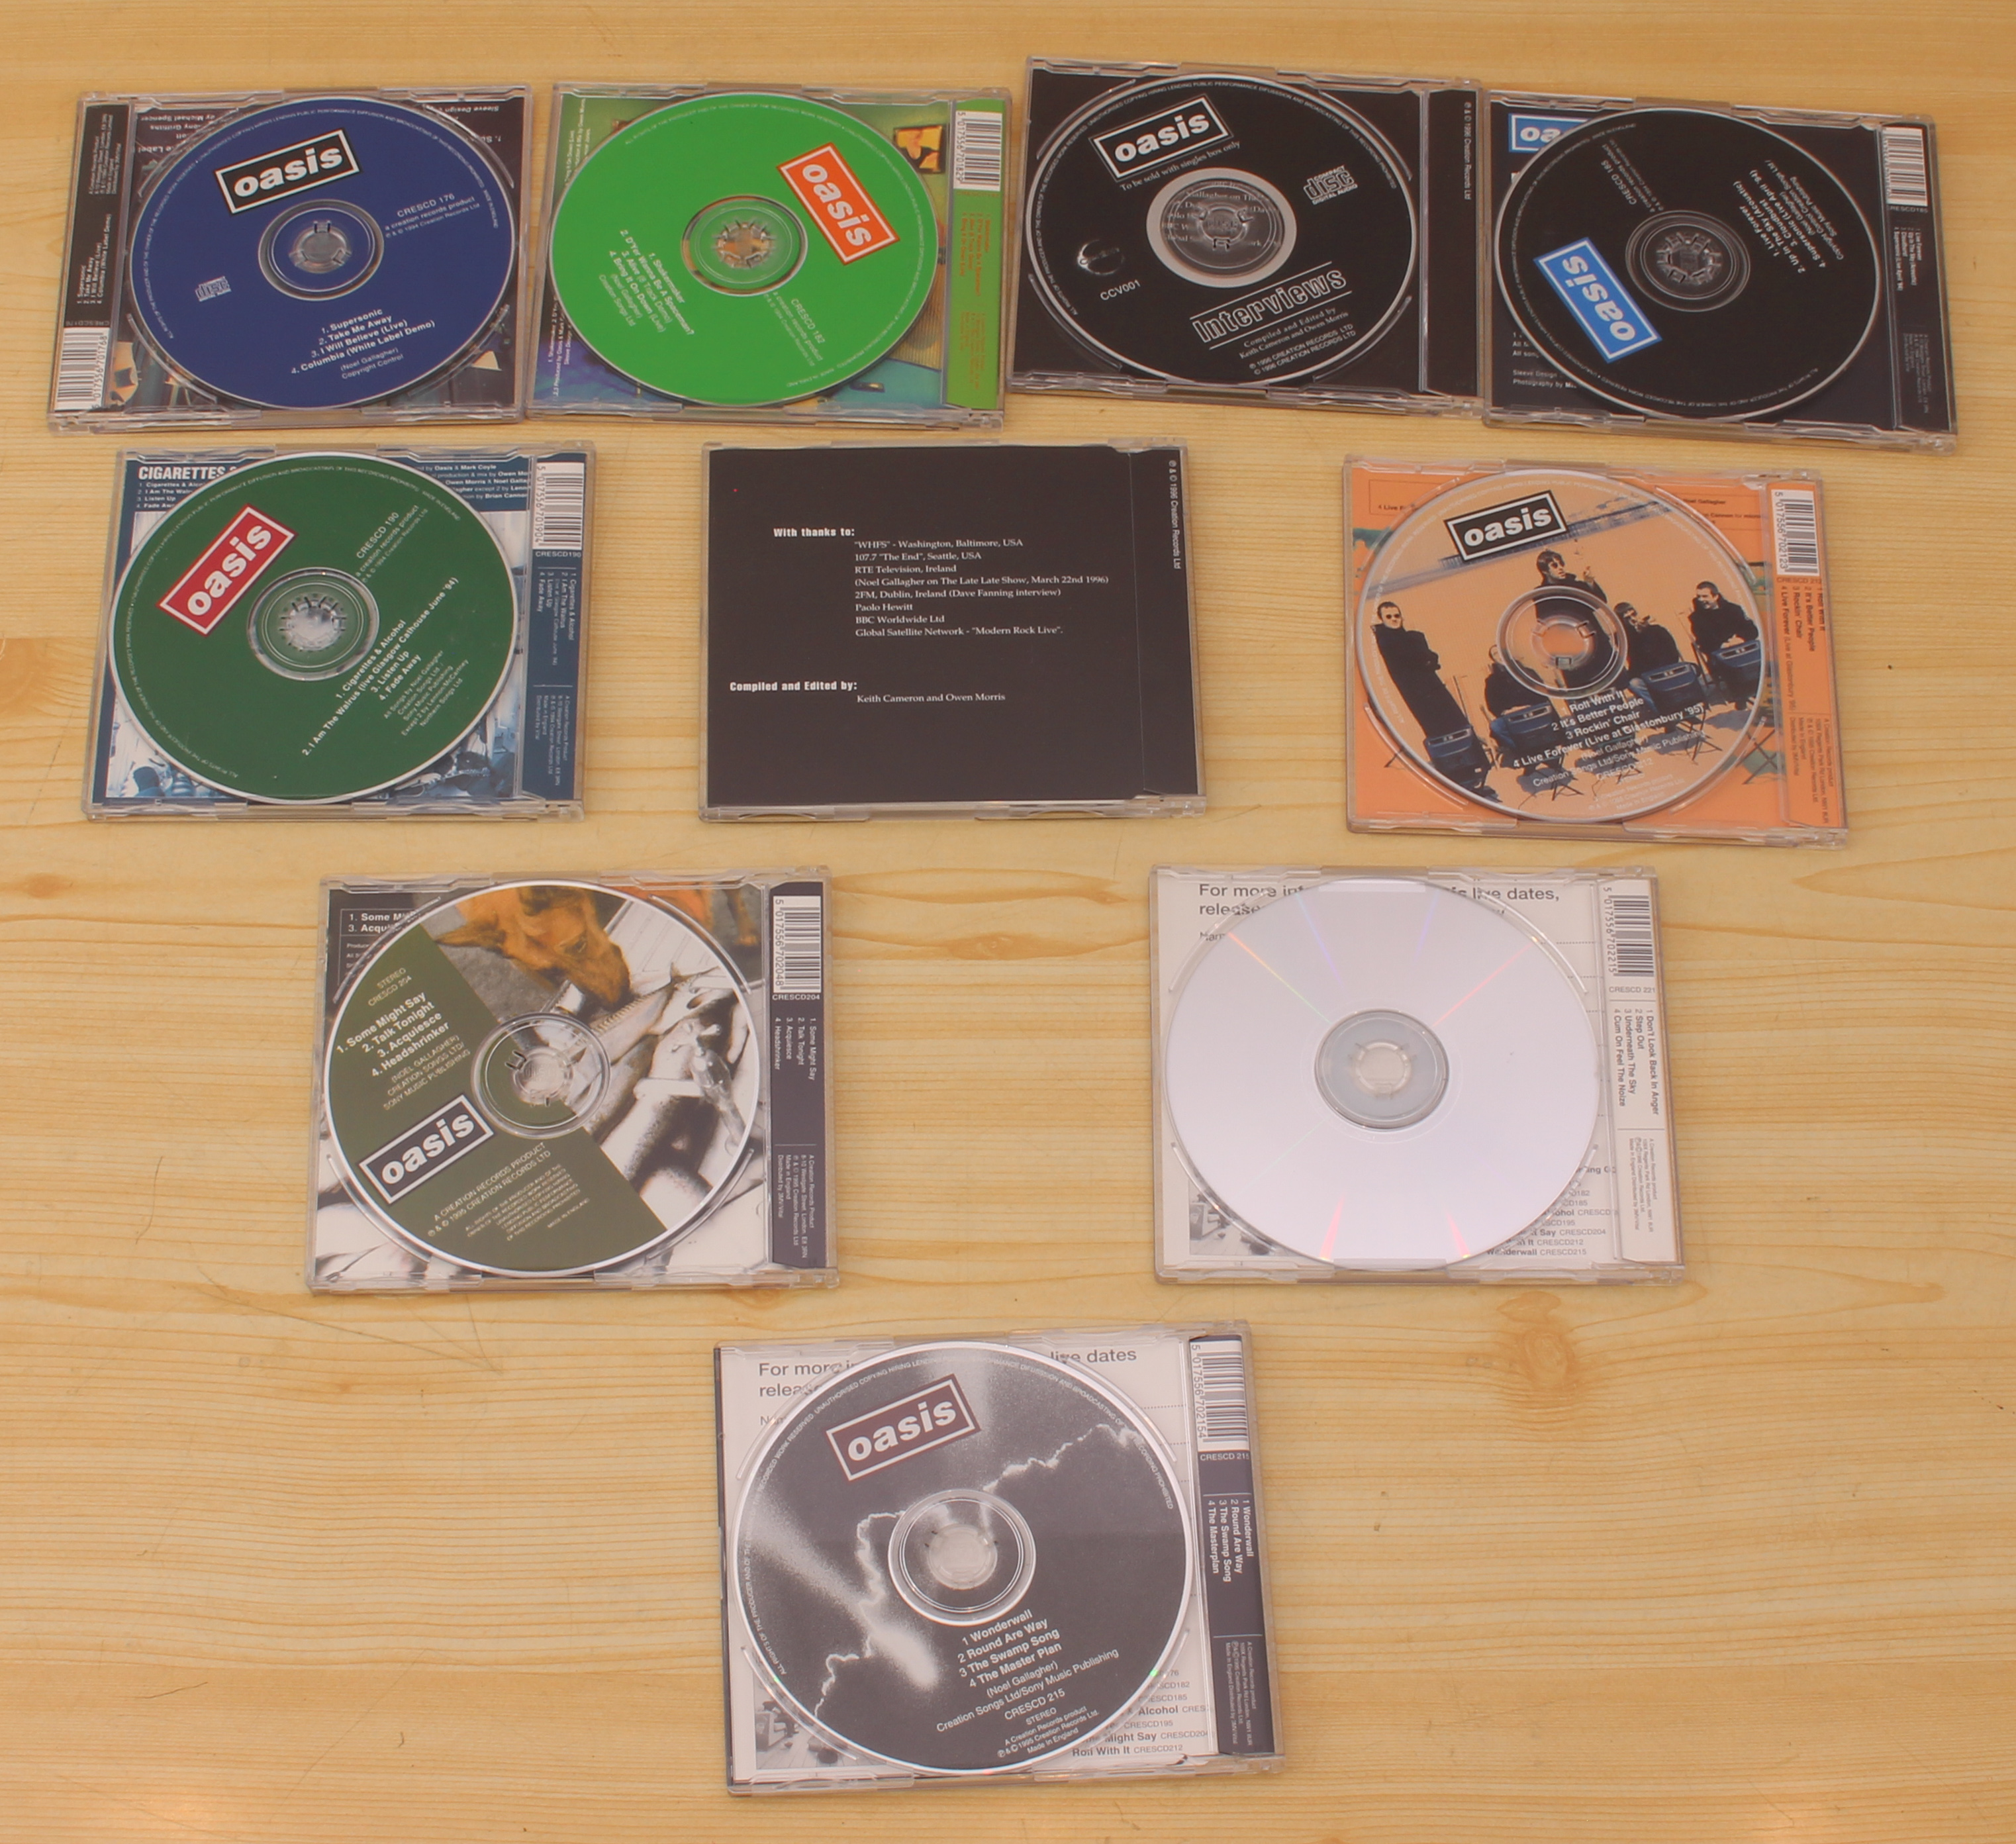 Two Oasis CD singles box sets to include: Definitely Maybe (5 CD singles box set with booklet - Image 4 of 4